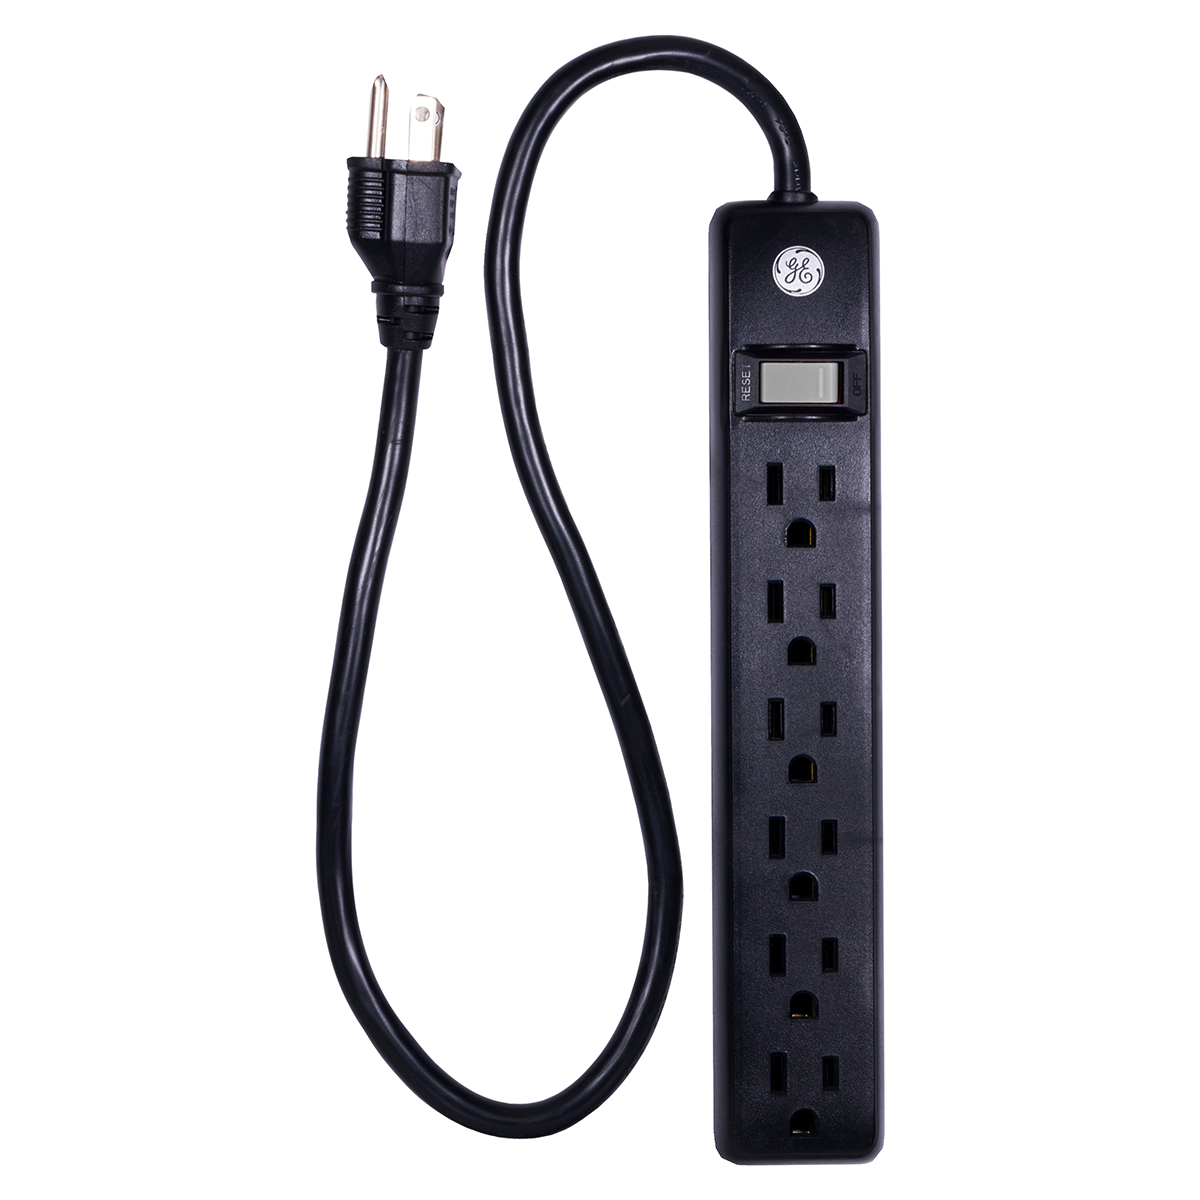 GE 6-Outlet Power Strip, 2ft Cord, Black